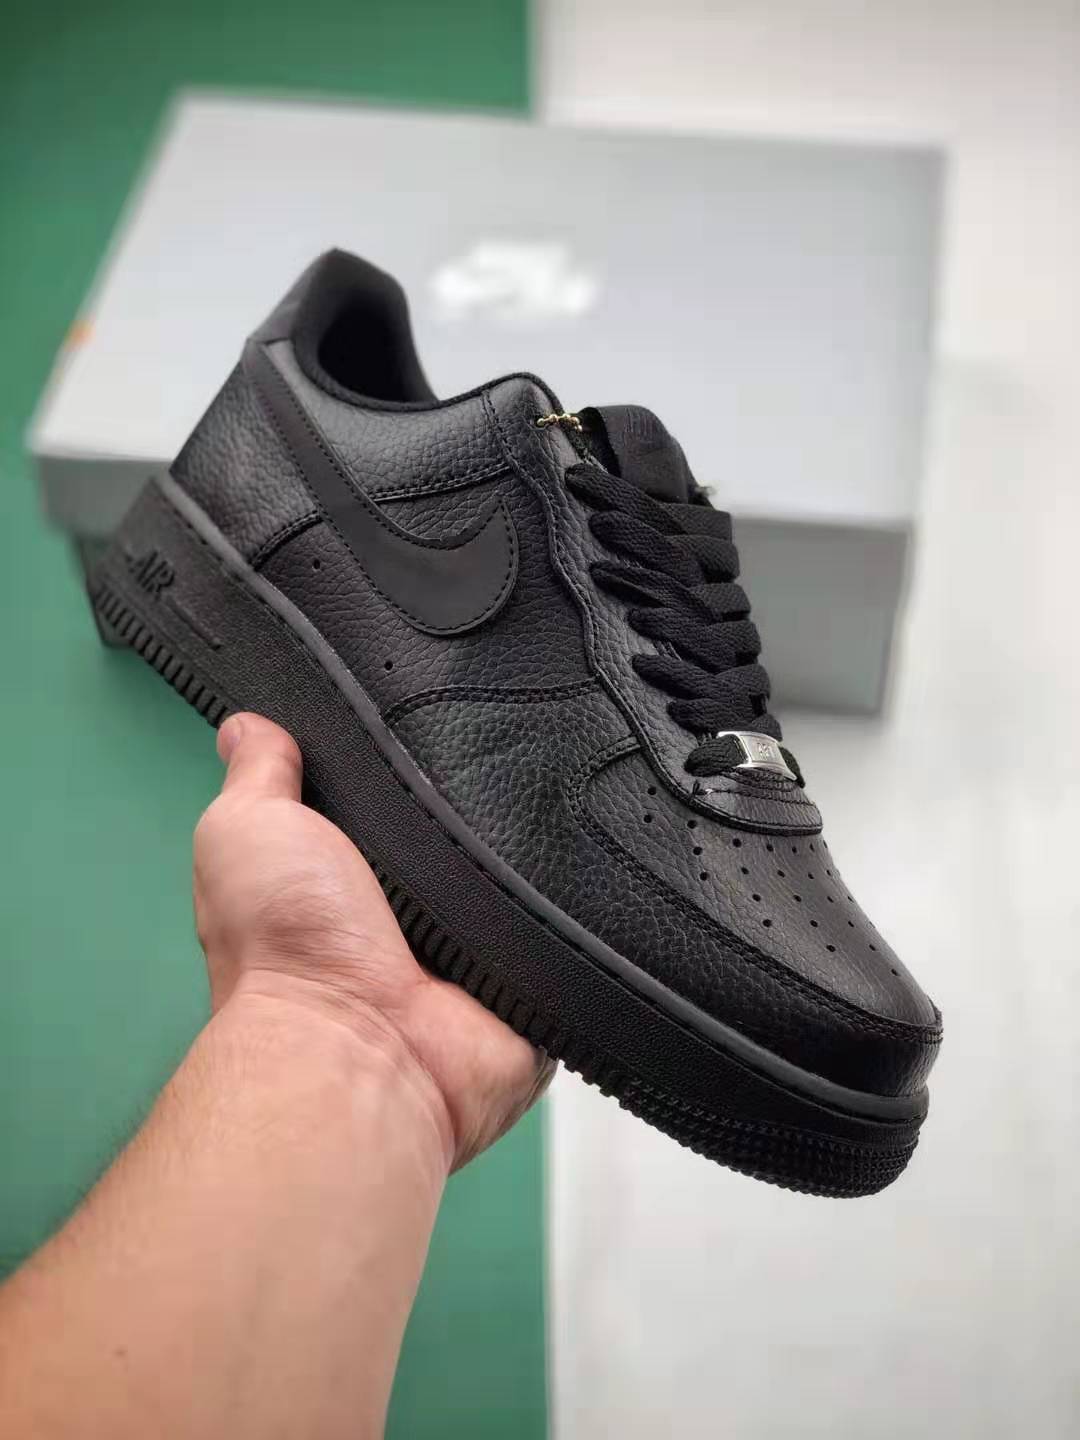 Nike Air Force 1 Low 'Anthracite' BQ4326-001 - Limited Edition Sneakers